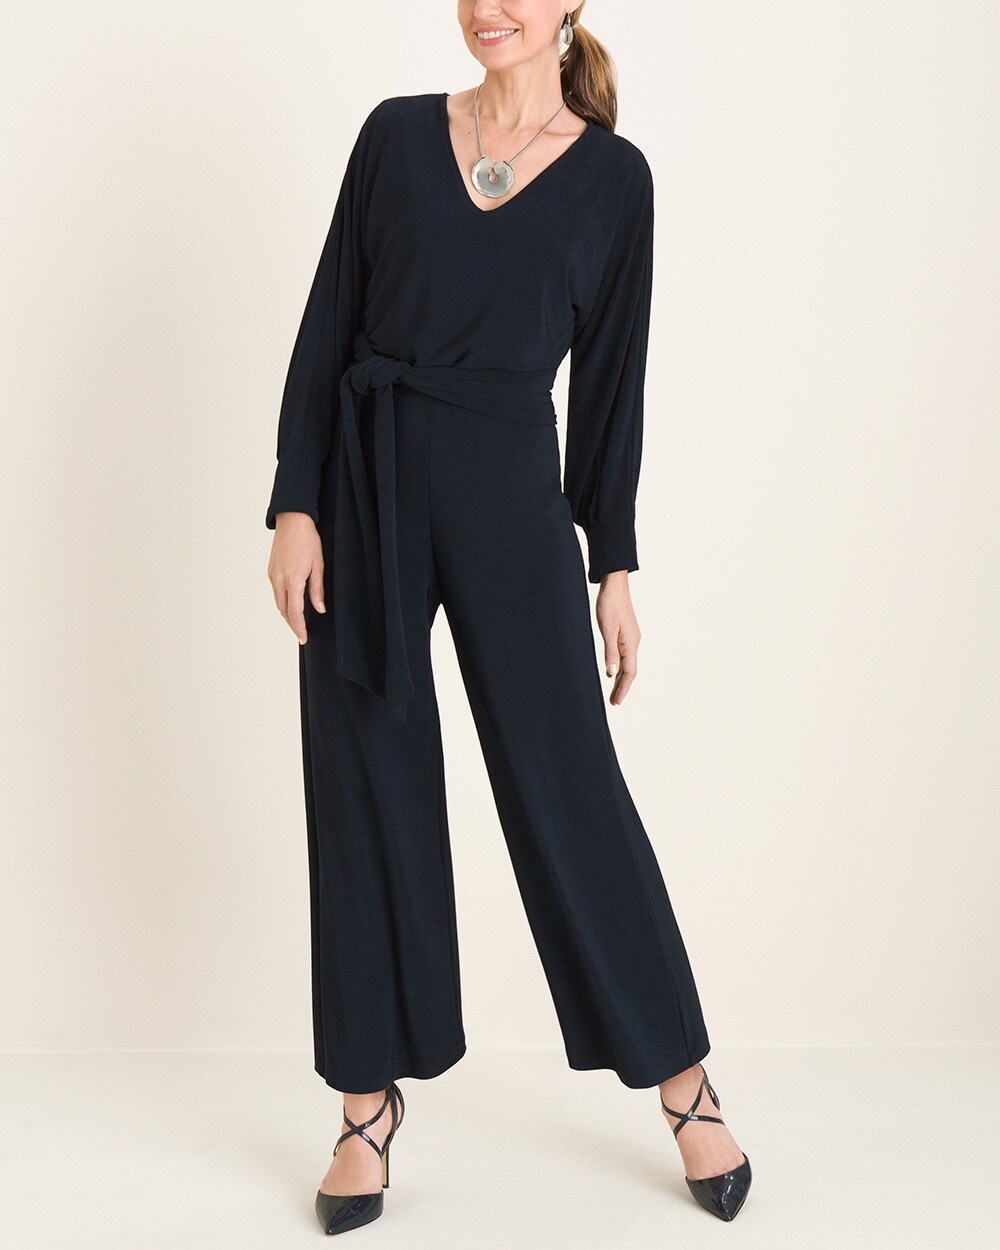 Best Jumpsuits for Summer - Connecticut in Style